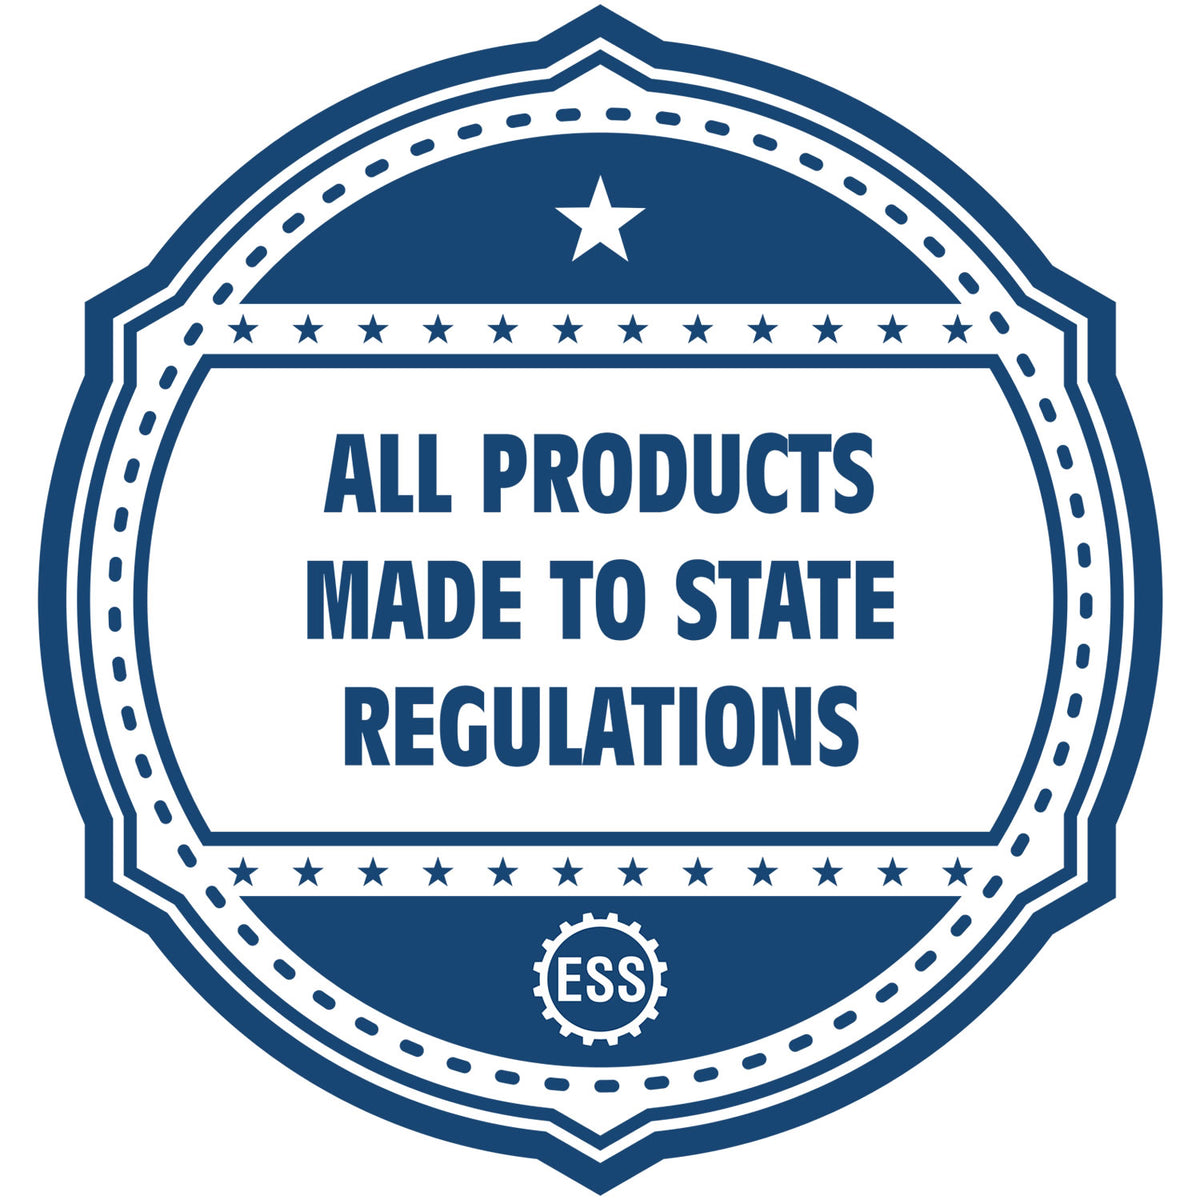 A blue icon or badge for the Slim Pre-Inked Mississippi Professional Geologist Seal Stamp showing that this product is made in compliance with state regulations.